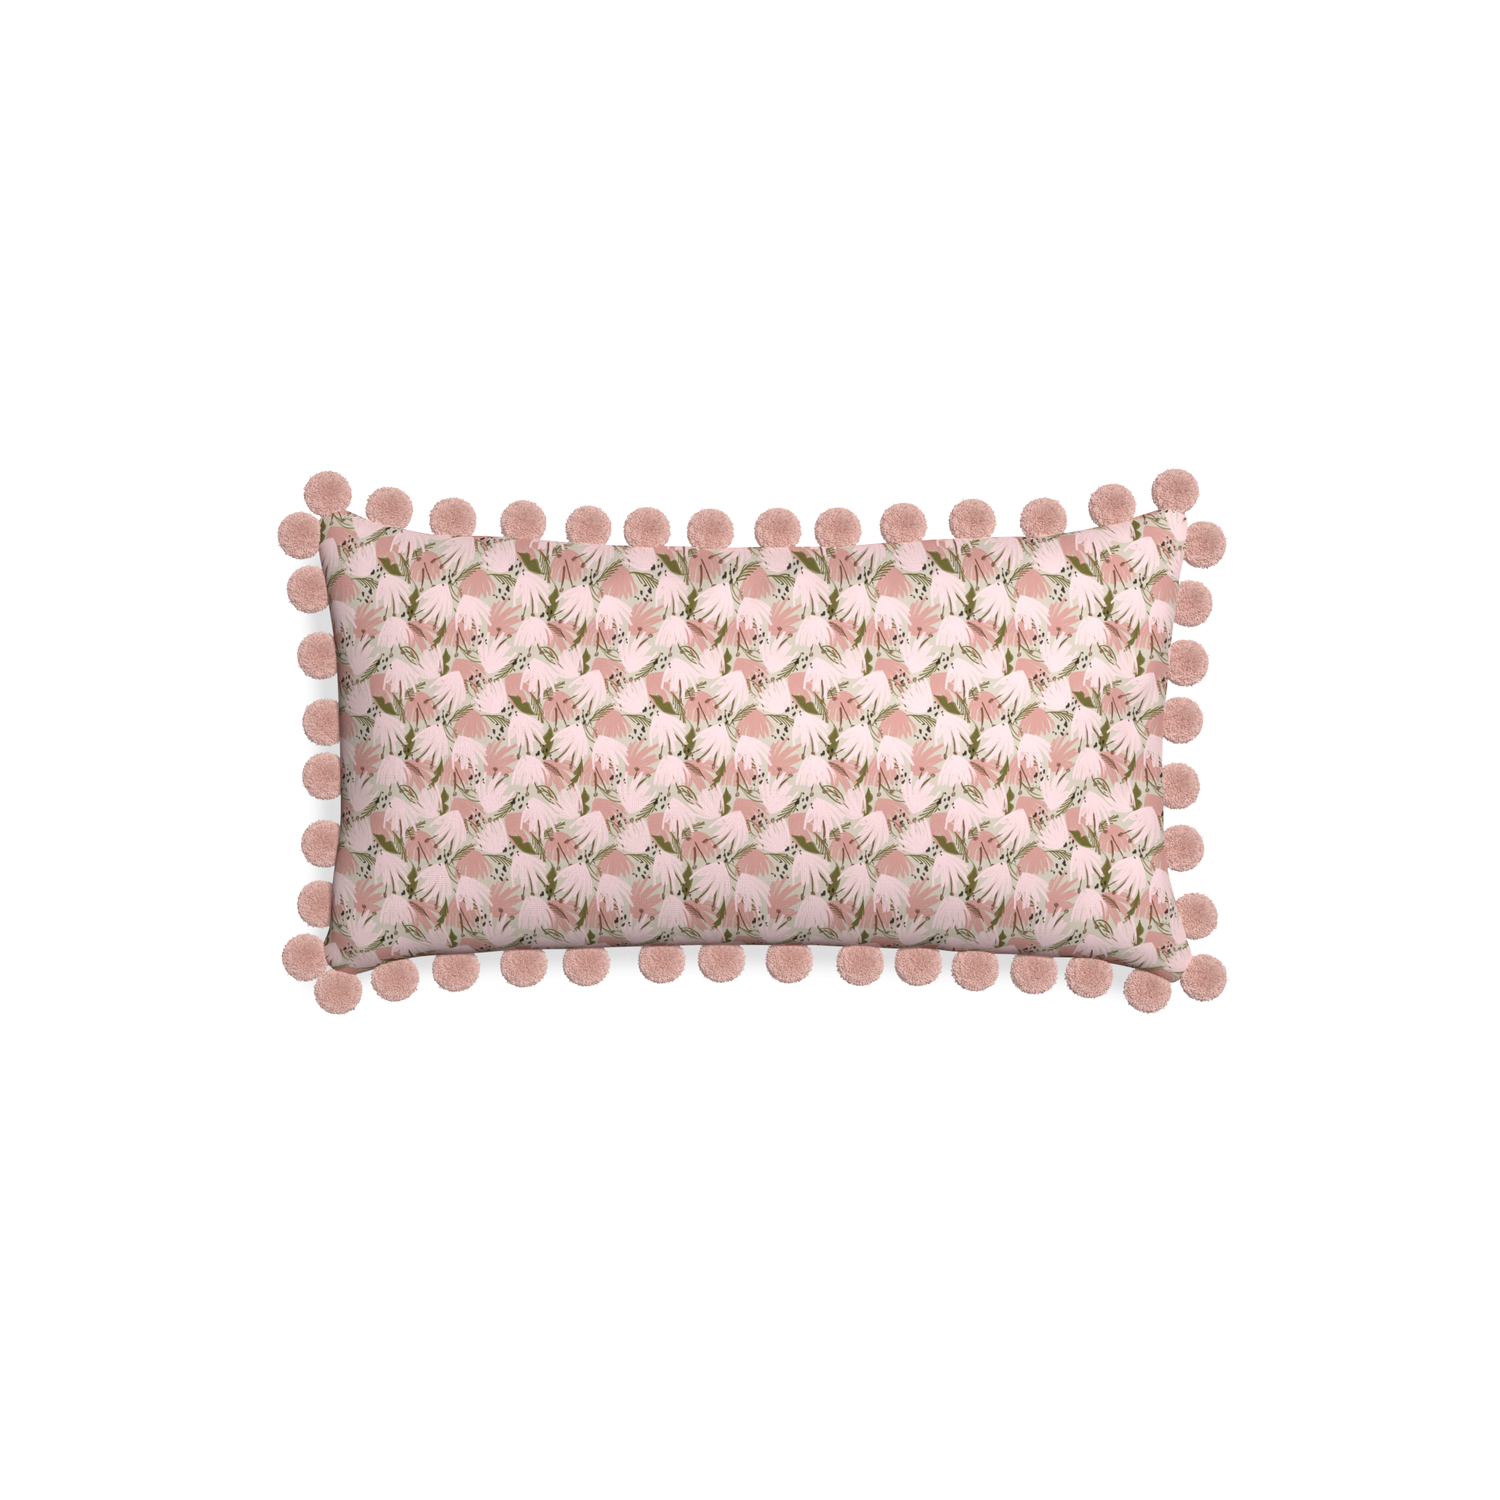 Petite-lumbar eden pink custom pink floralpillow with rose pom pom on white background